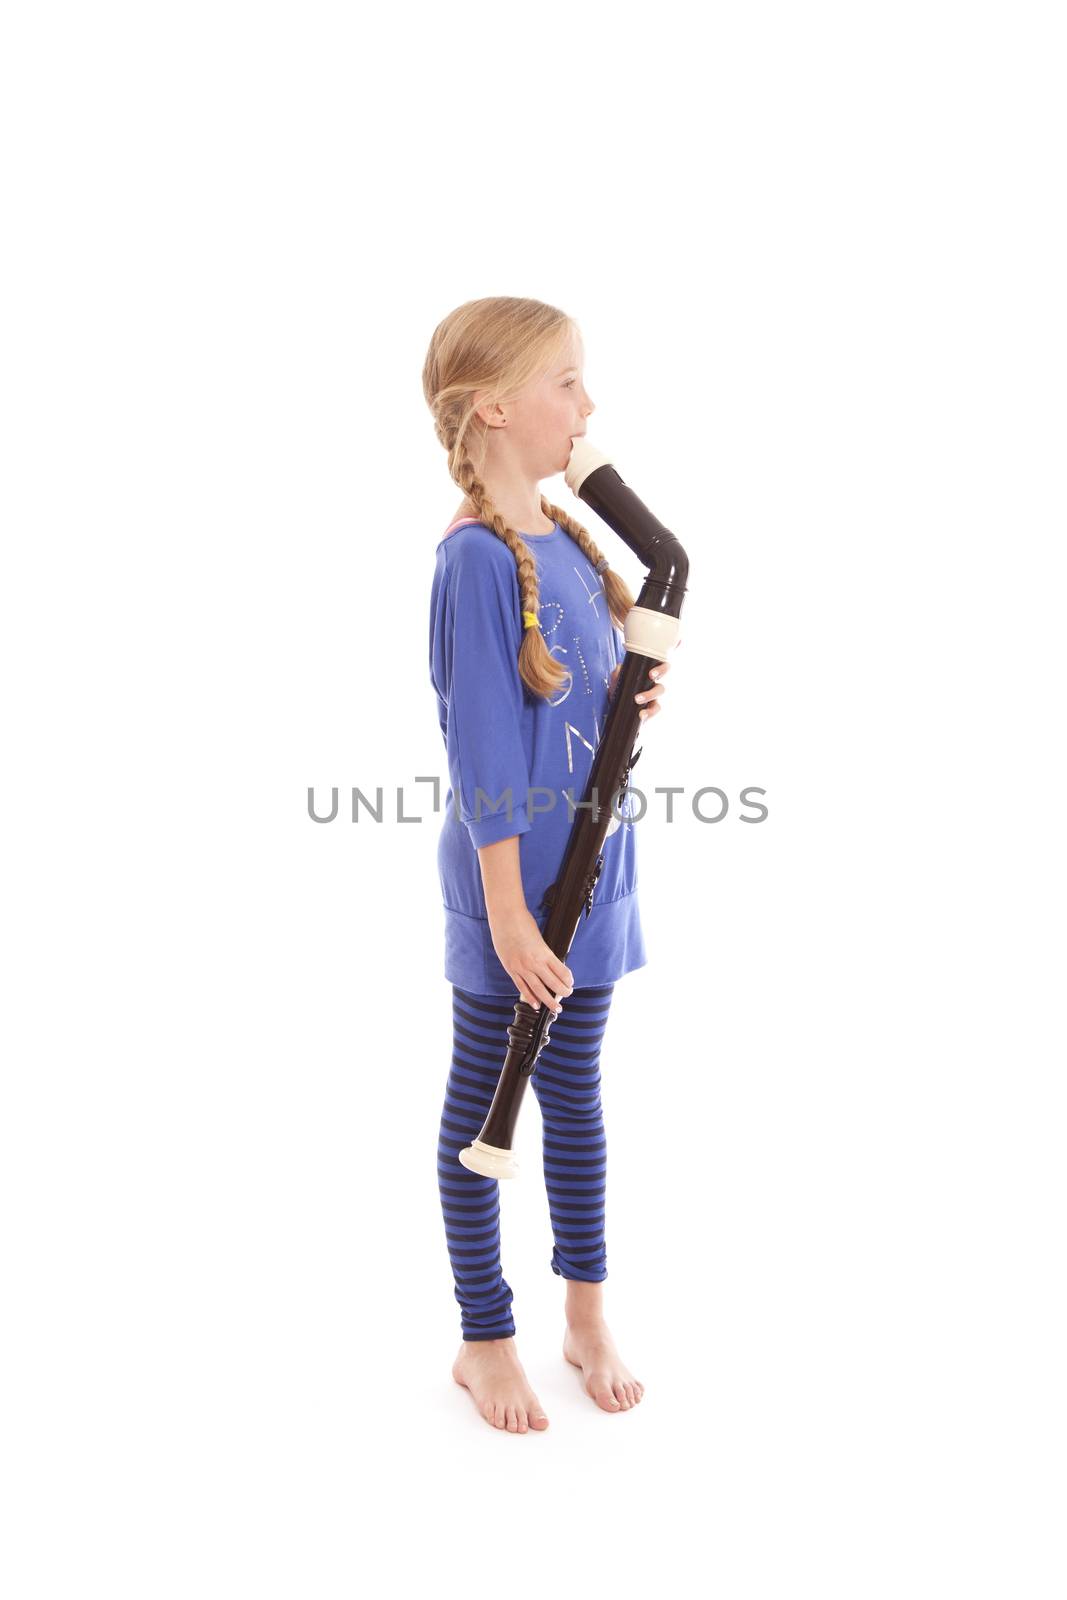 young girl in blue playing bass recorder against white backgound